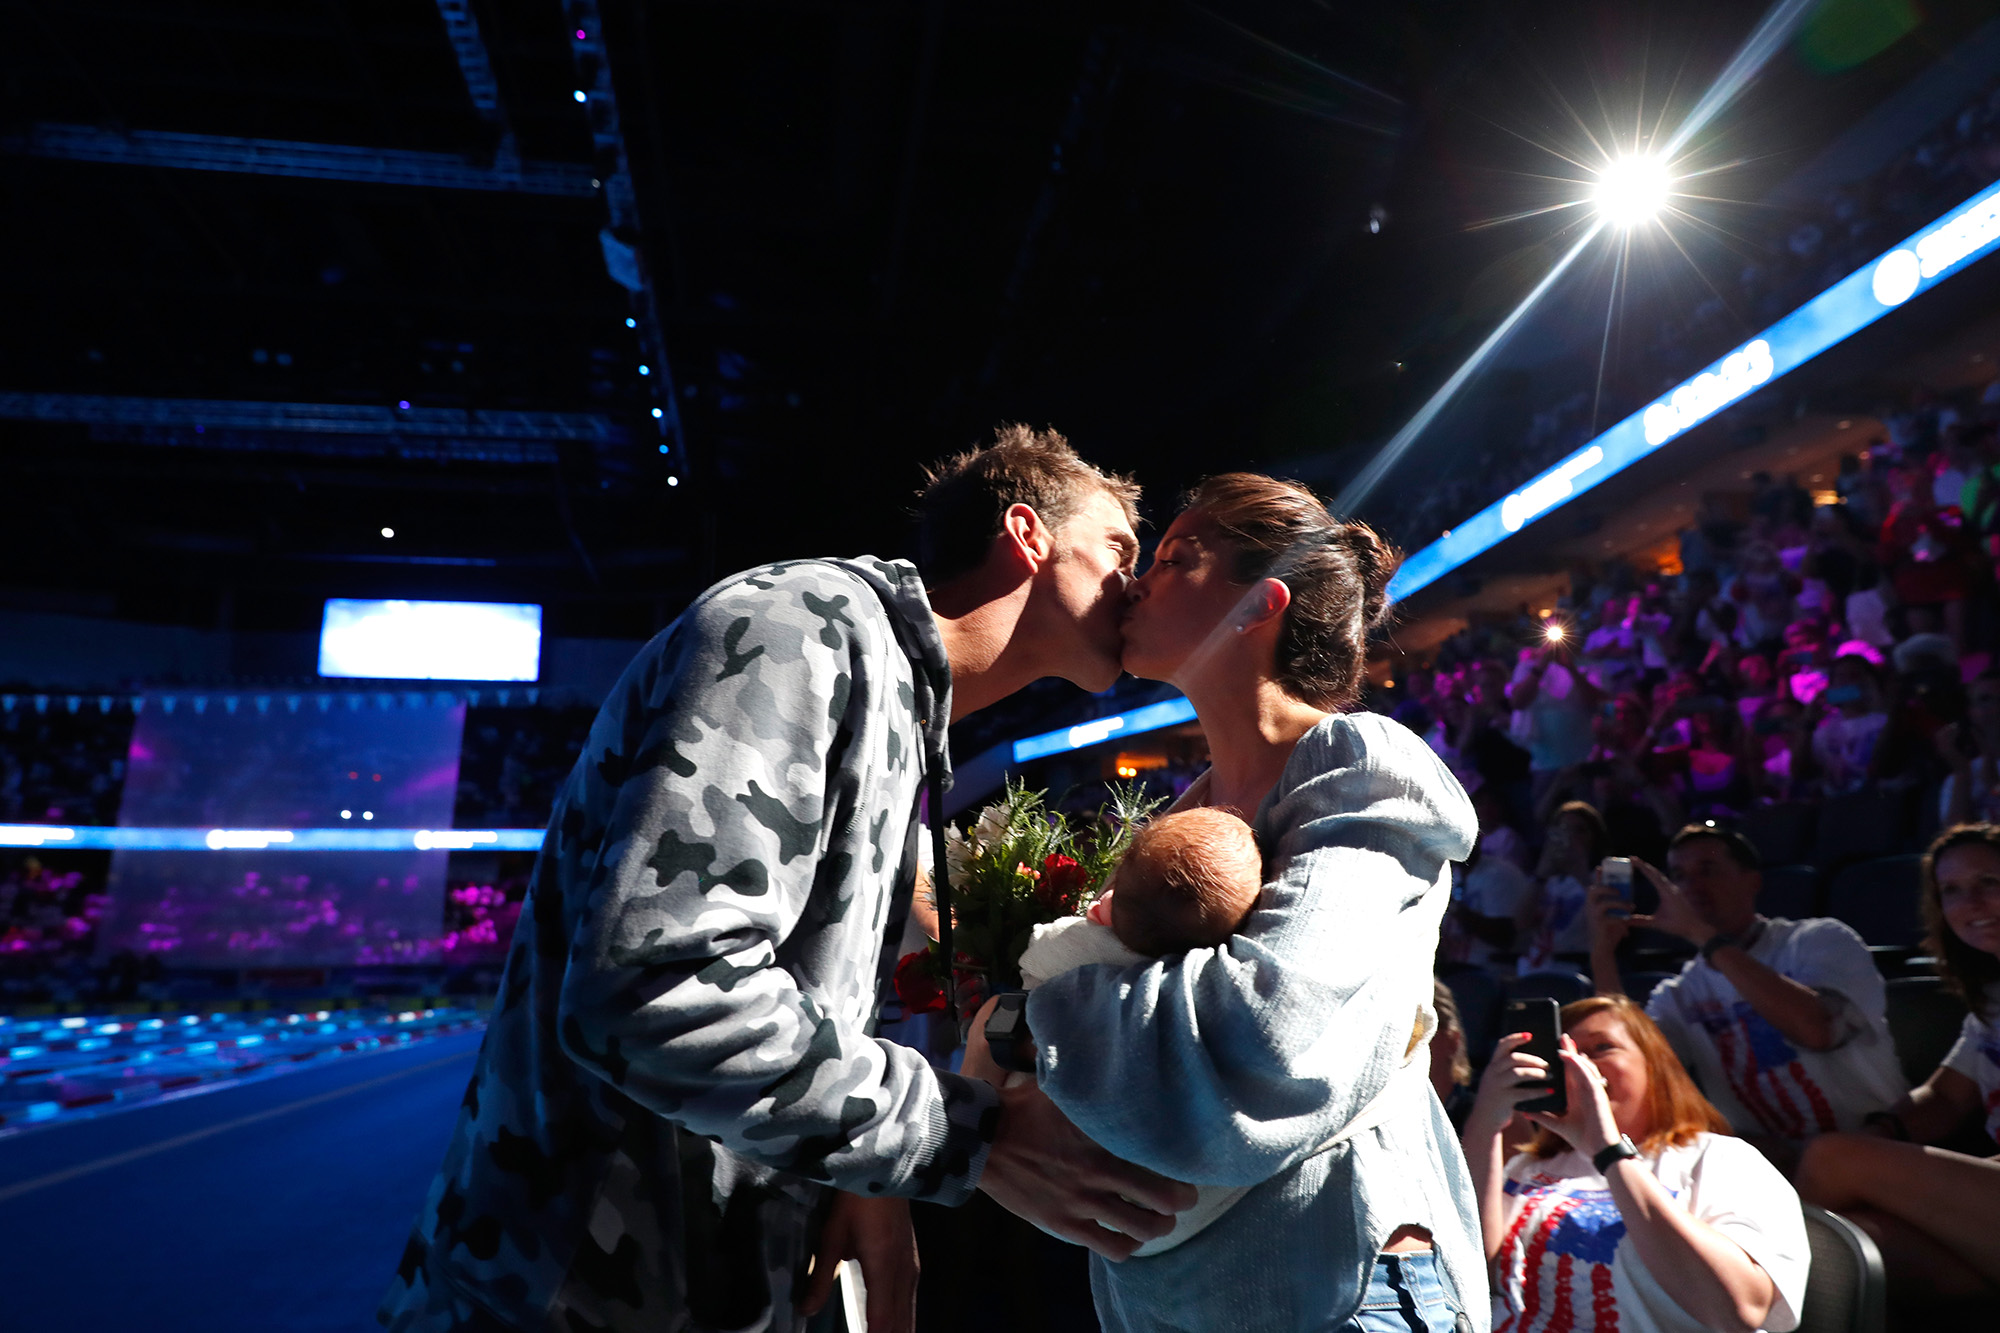 Michael Phelps of the United States celebrates with his fiancee Nicole Johnson and their son Boomer after finishing first in the final heat for the Men's 200 Meter Individual Medley during Day Six of the 2016 U.S. Olympic Team Swimming Trials at CenturyLink Center on July 1, 2016 in Omaha, Nebraska.  (Photo by Al Bello/Getty Images) (Al Bello&mdash;Getty Images)